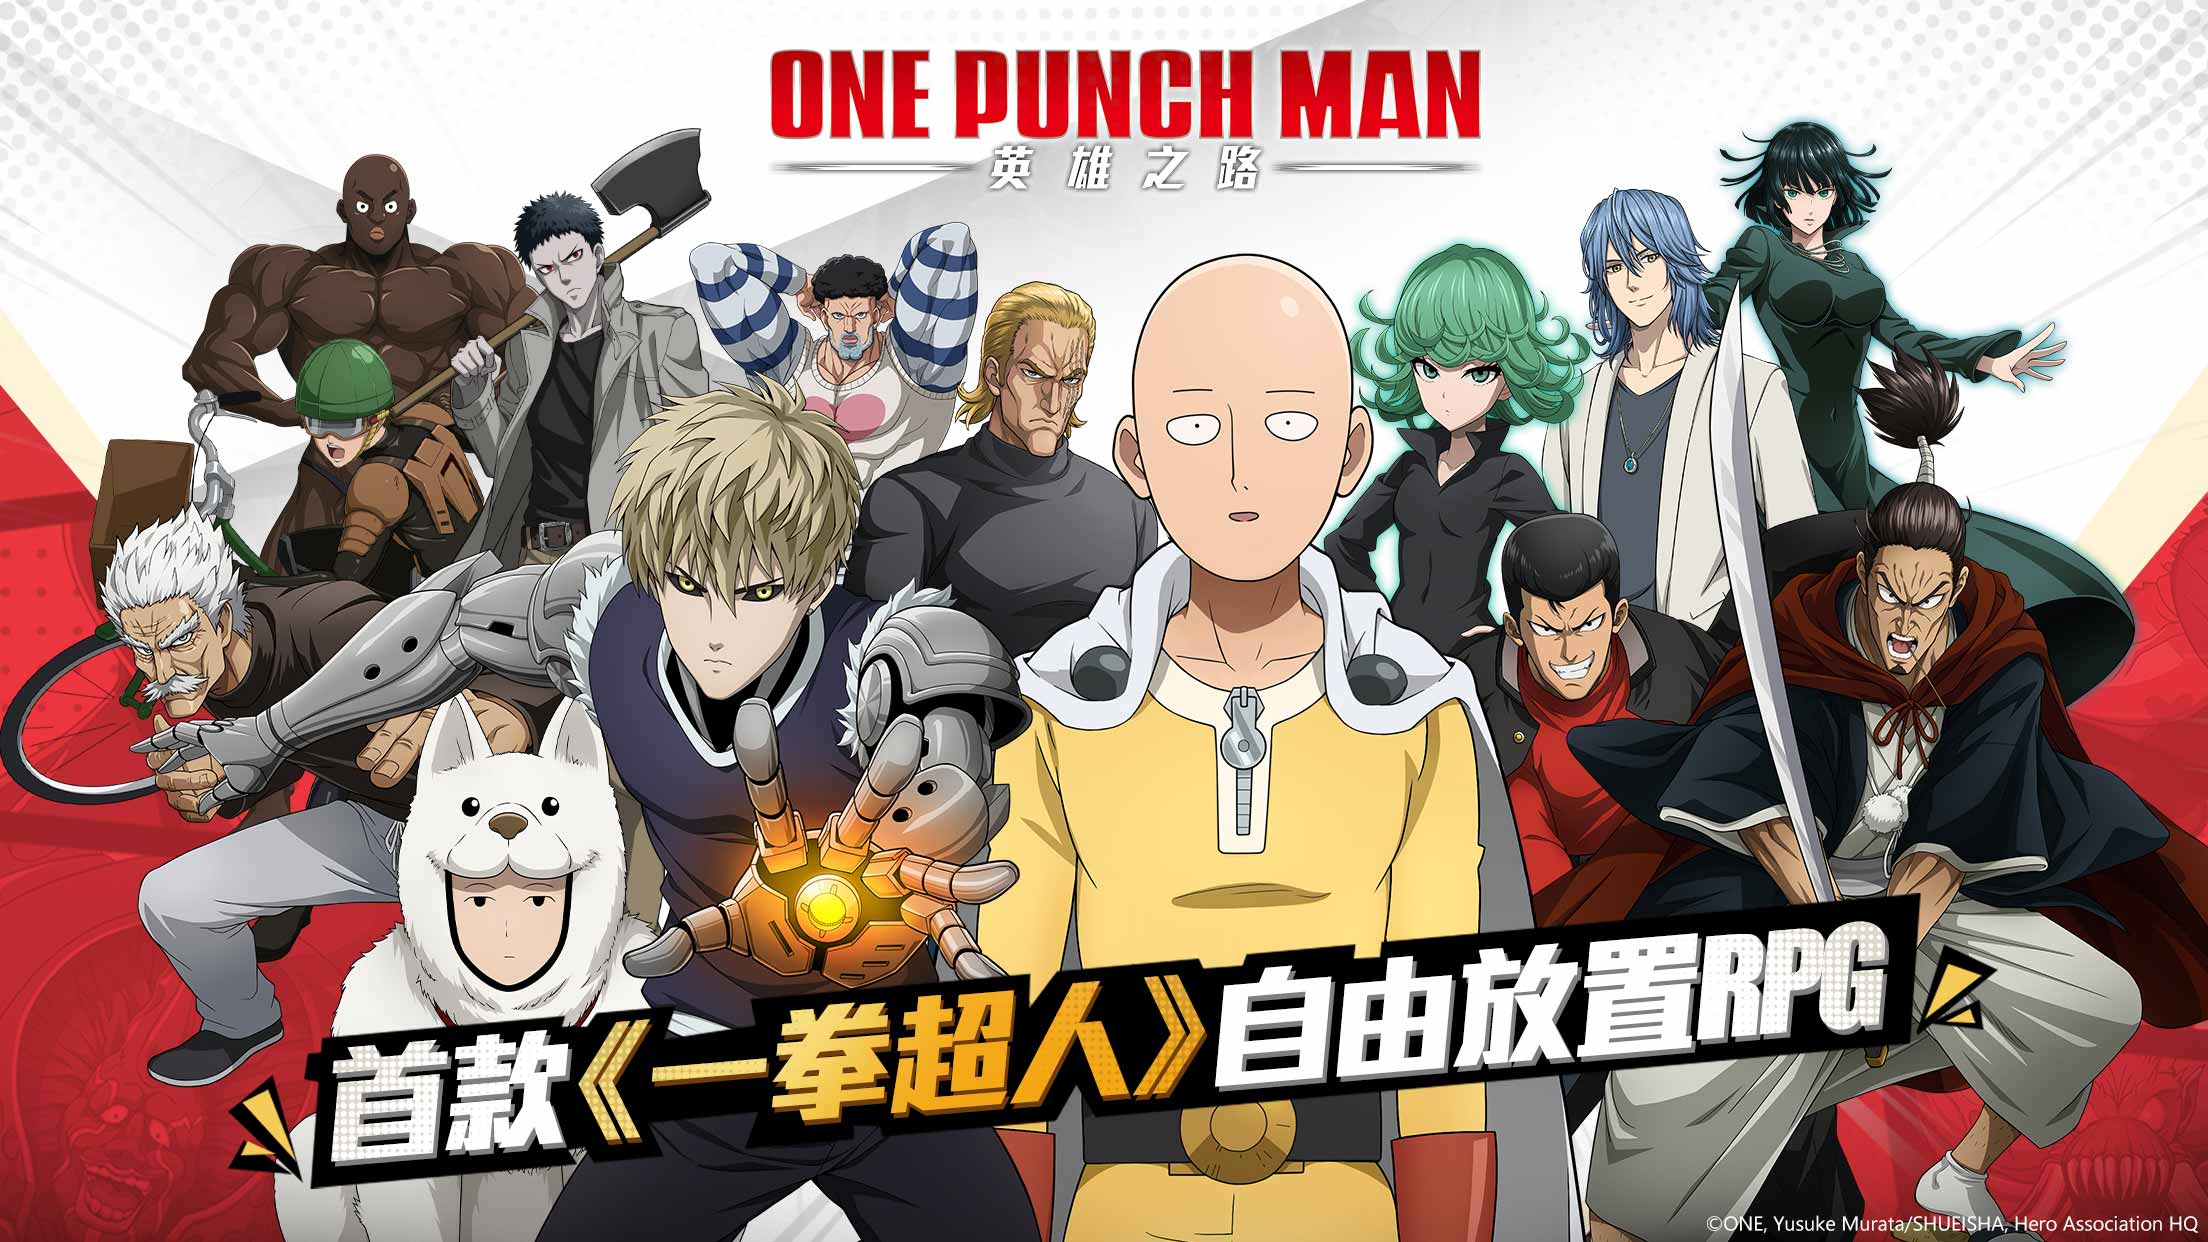 Hero Return Donghua Review: A Little More Than Just A One Punch Man Wanna  Be!